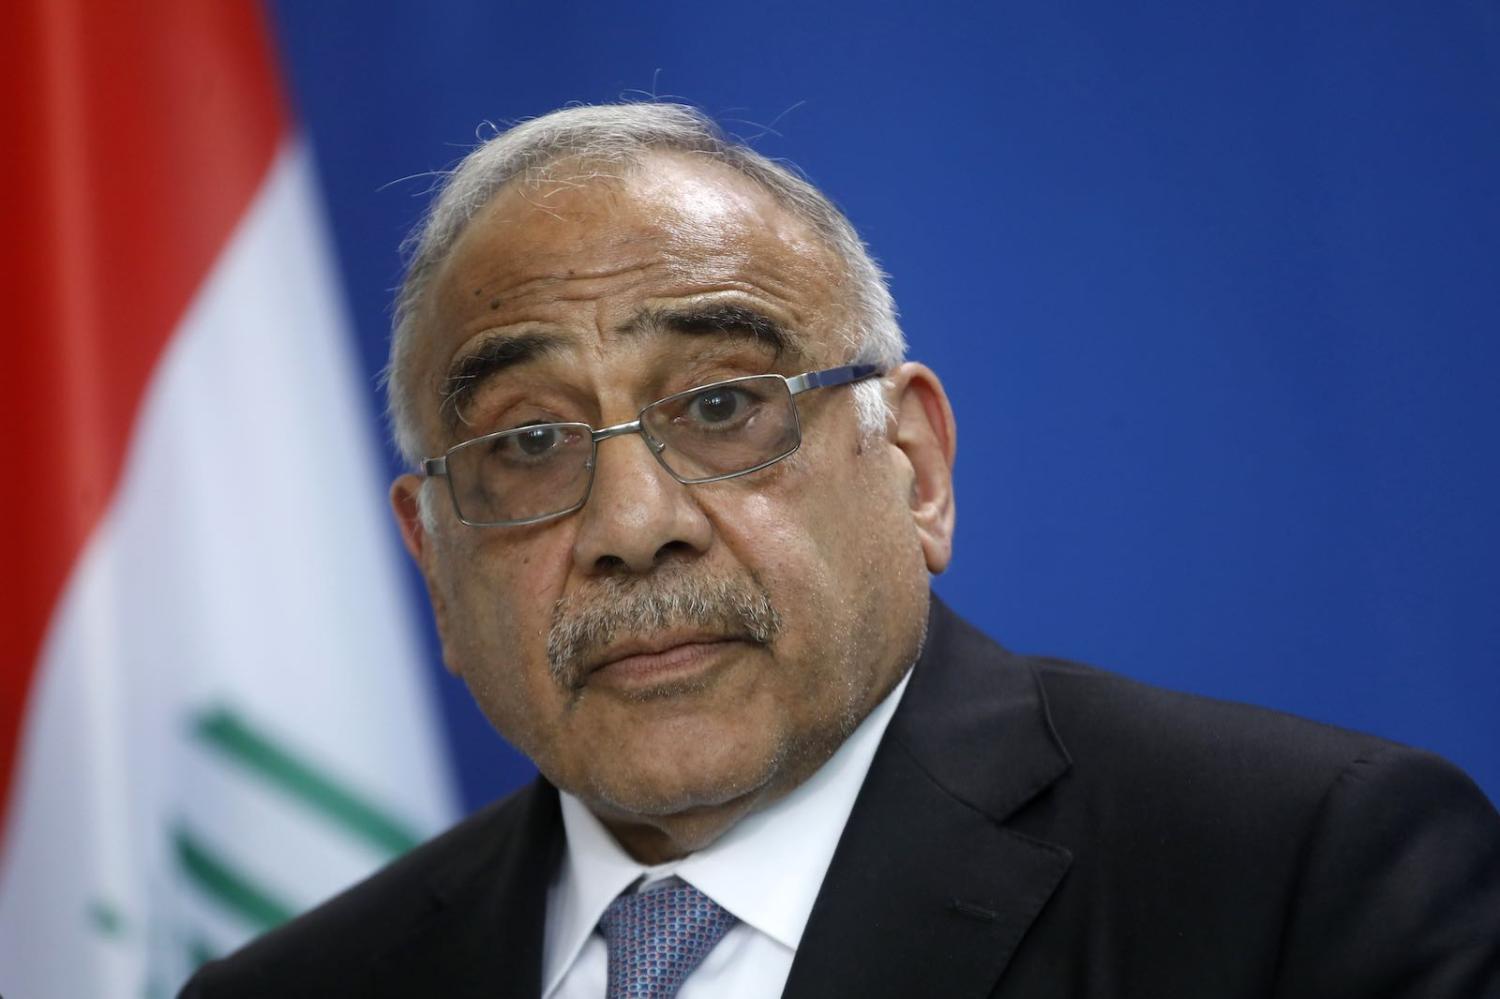 Iraqi Prime Minister Adel Abdul-Mahdi (Photo by Michele Tantussi/Getty Images)